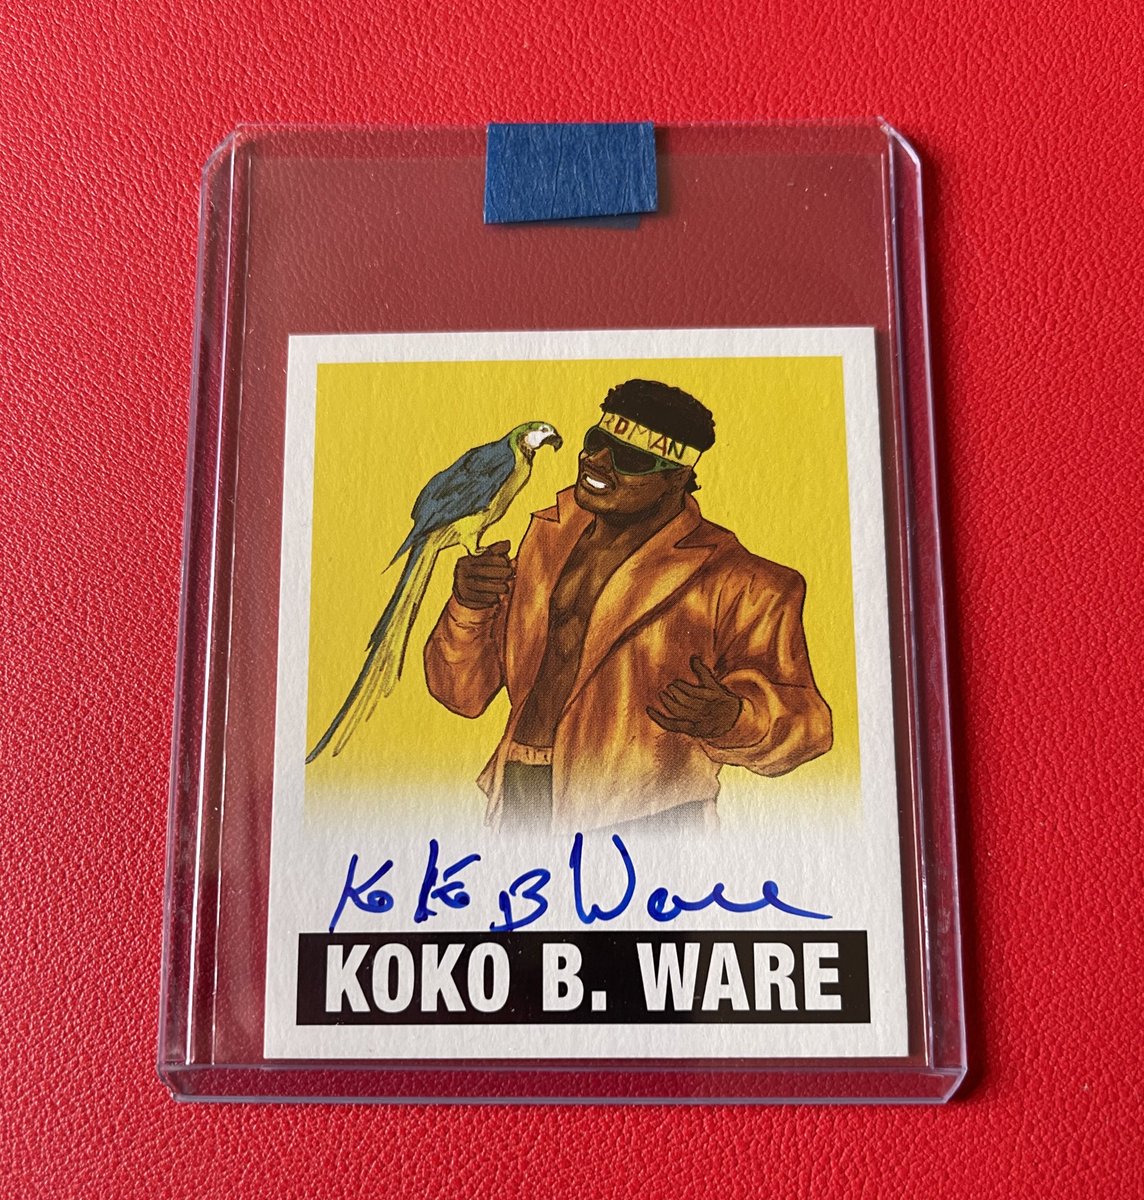 Another day, another Leafs Originals Wrestling auto to the stash. #wrestlingcards #kokobware